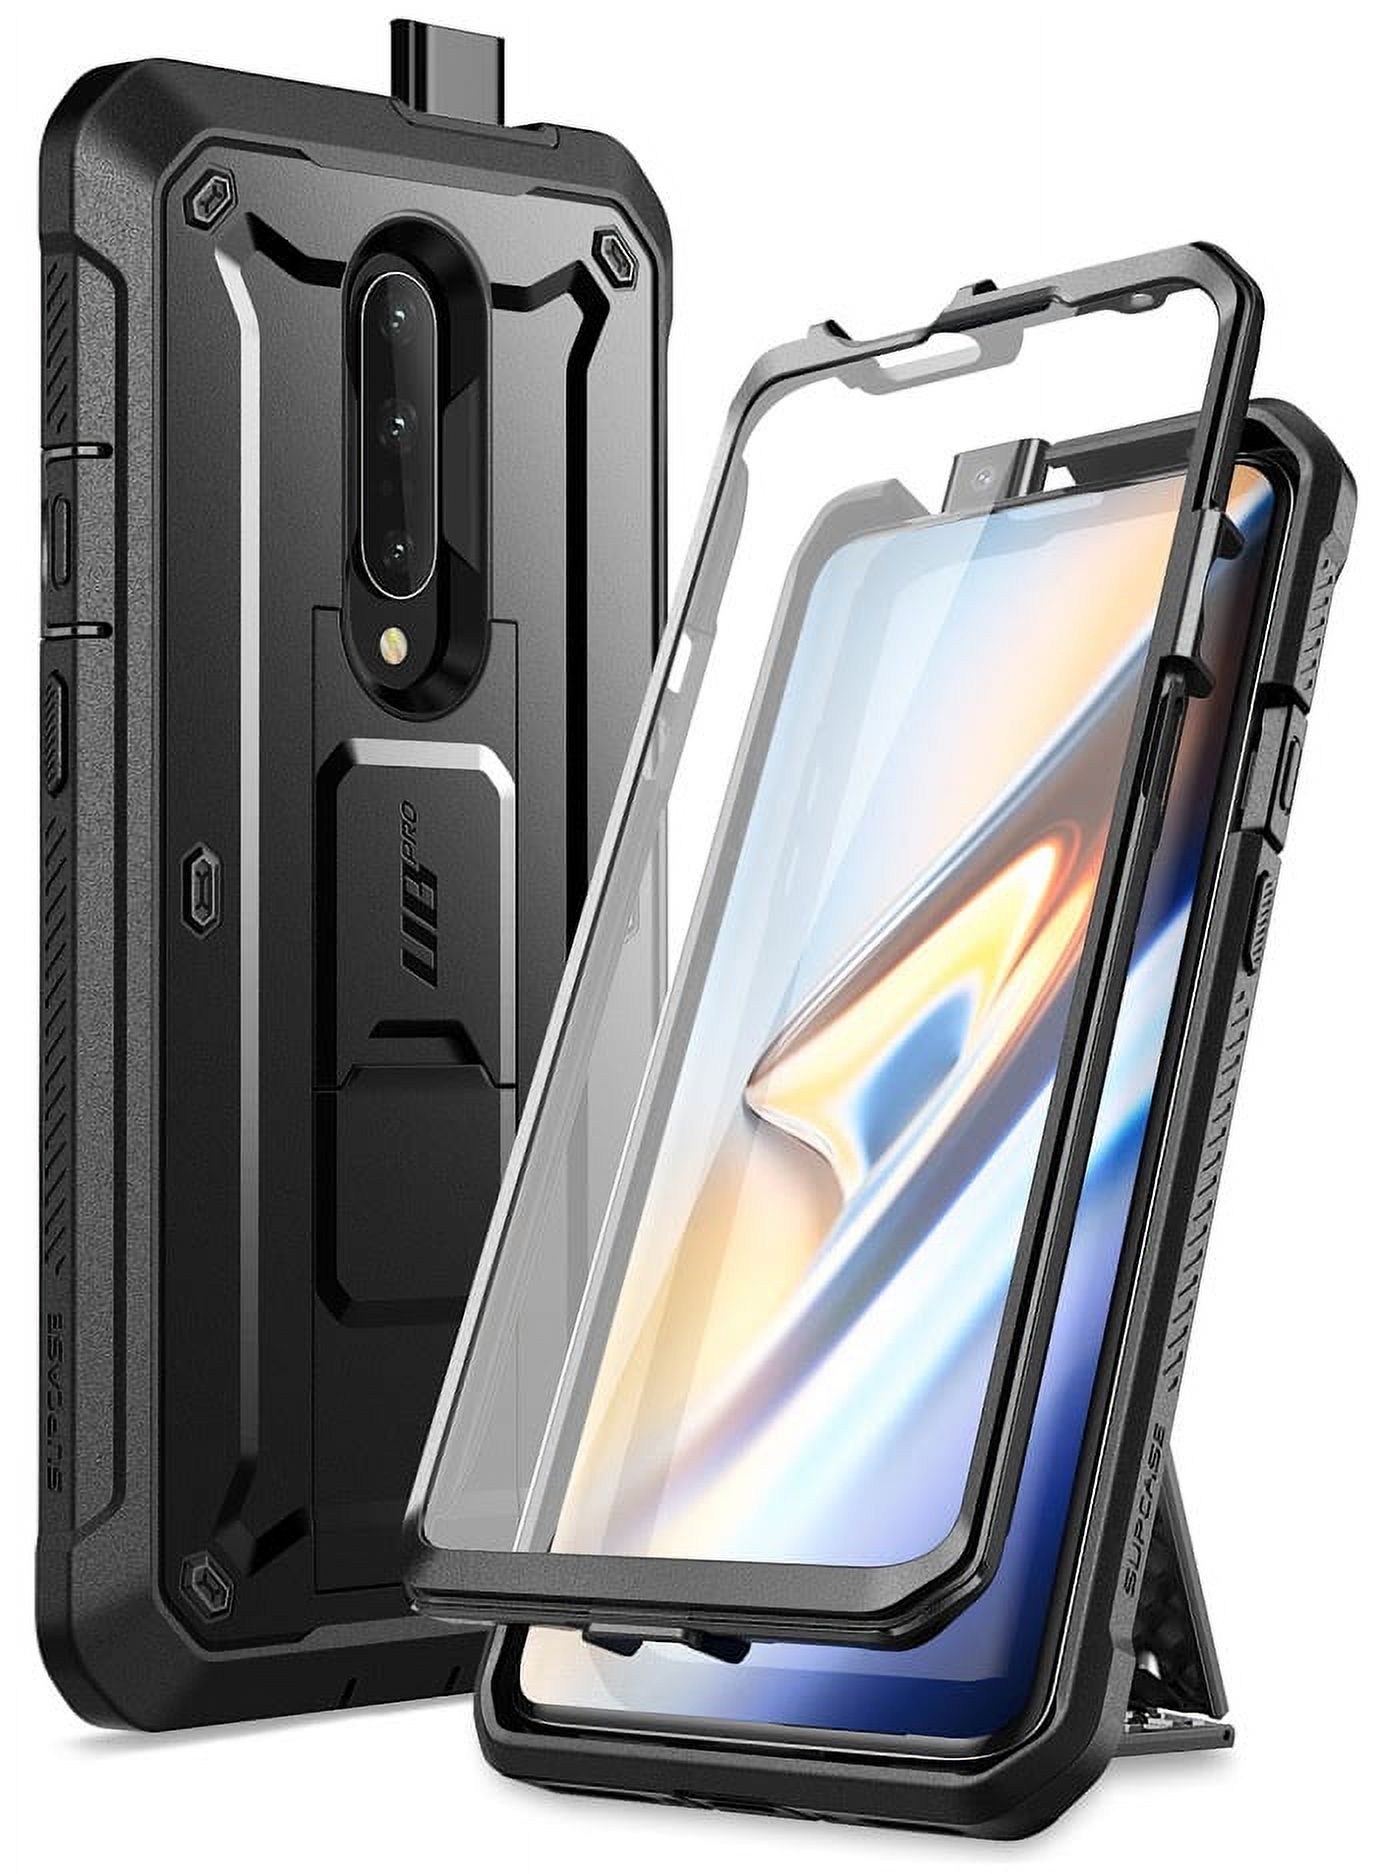 SUPCASE Unicorn Beetle Pro Series Case for OnePlus 7 Pro, Full-Body Rugged Holster Kickstand OnePlus 7 Pro Case with Built-in Screen Protector (Black) - image 1 of 8